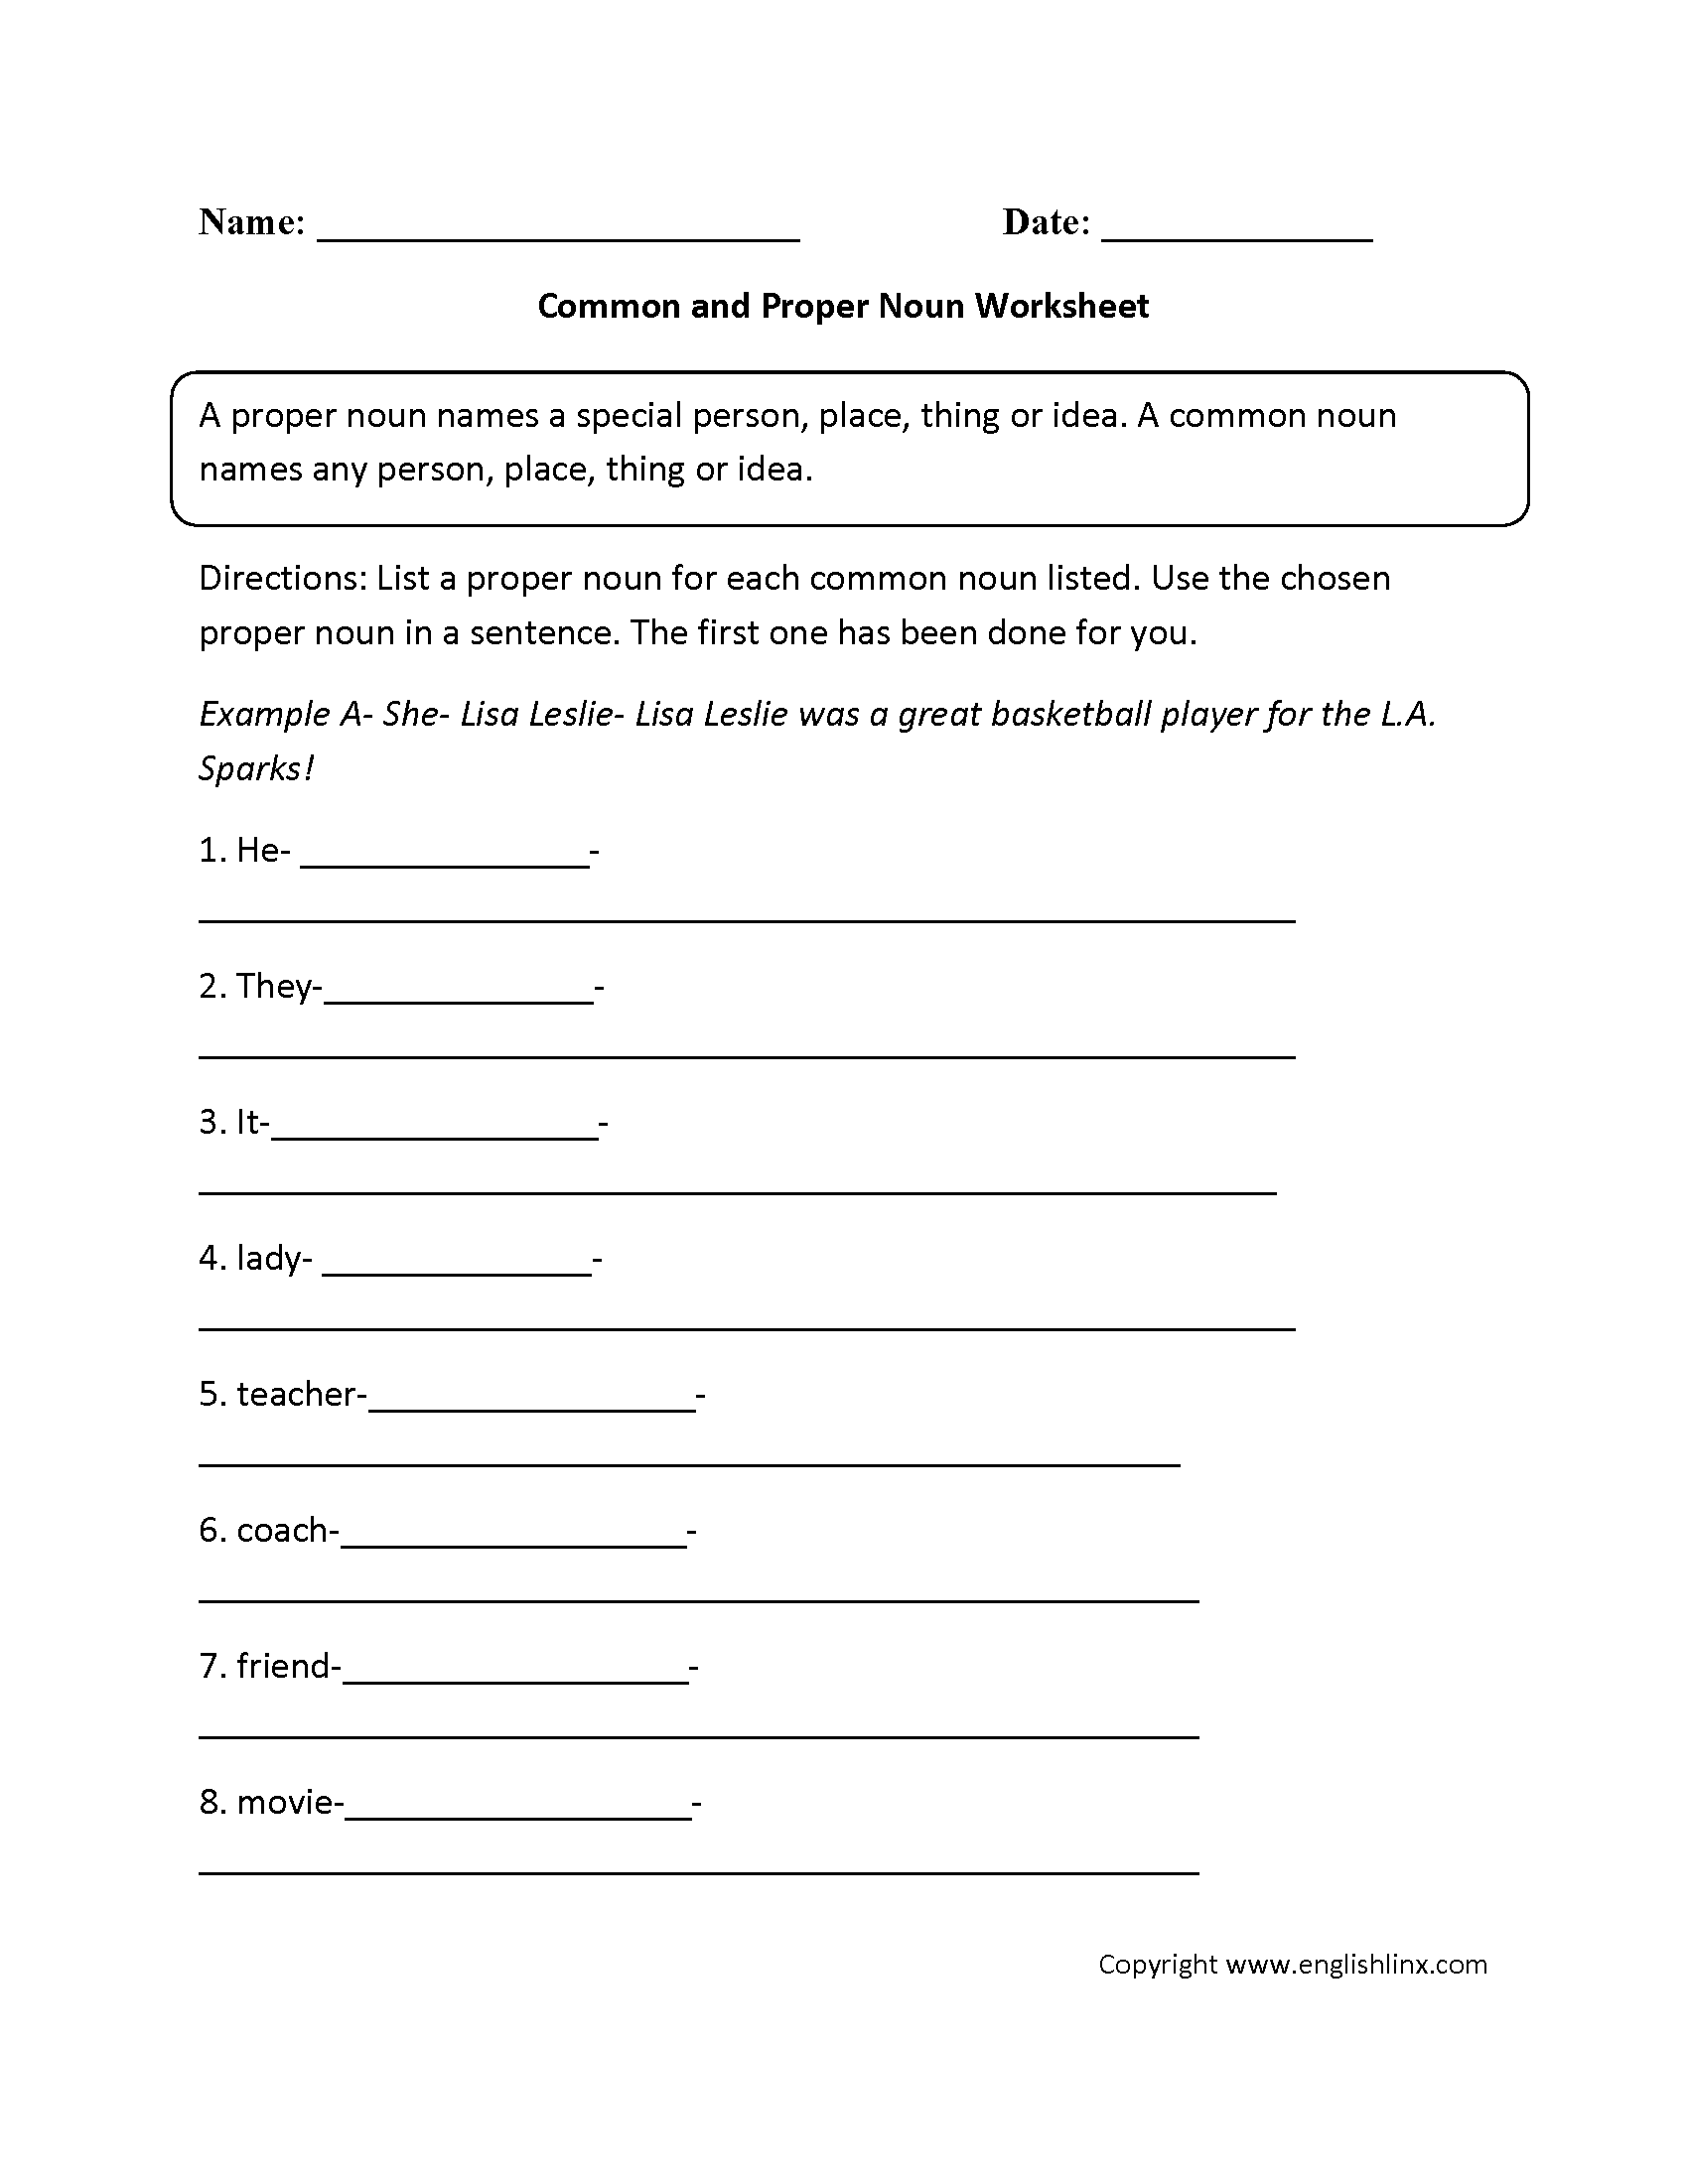 concrete-and-abstract-nouns-worksheet-preview